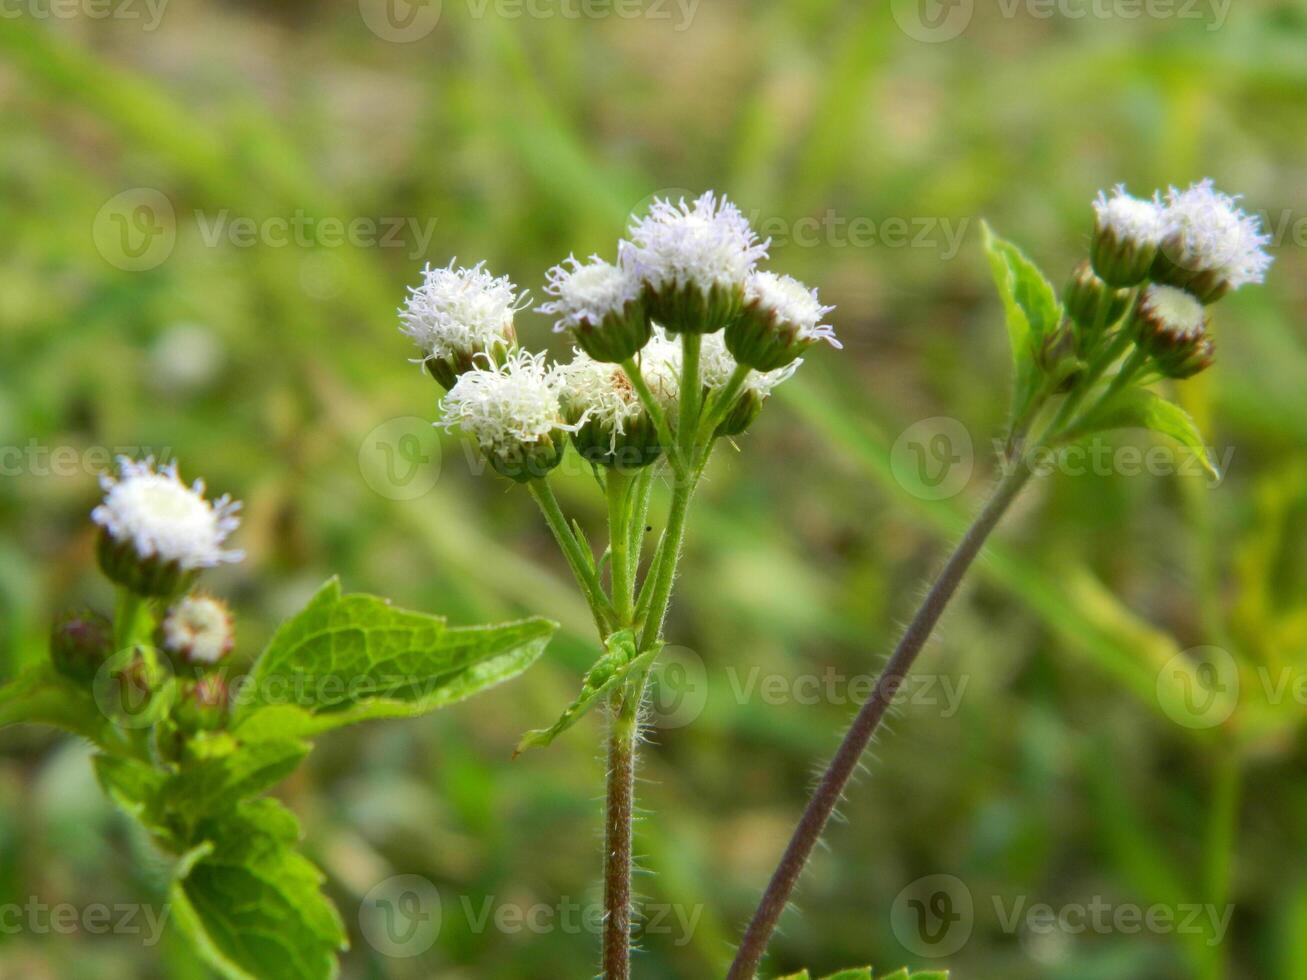 Close-up photo of a wild green plant that has beautiful flowers. Plants that grow wild in tropical nature